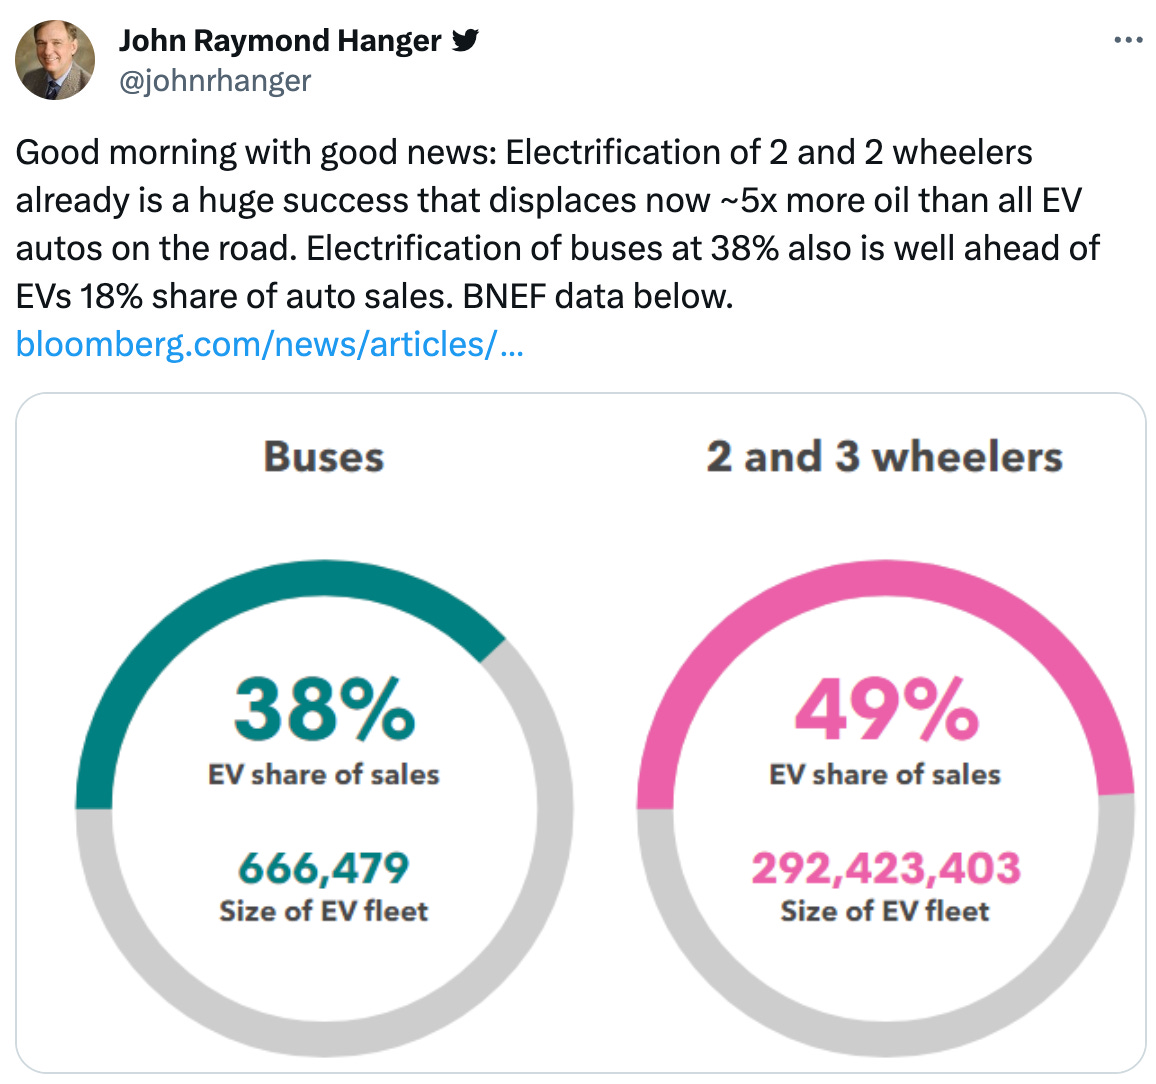  John Raymond Hanger  @johnrhanger Good morning with good news: Electrification of 2 and 2 wheelers already is a huge success that displaces now ~5x more oil than all EV autos on the road. Electrification of buses at 38% also is well ahead of EVs 18% share of auto sales. BNEF data below. https://bloomberg.com/news/articles/2023-11-03/the-ev-revolution-isn-t-only-arriving-on-four-wheels?srnd=green